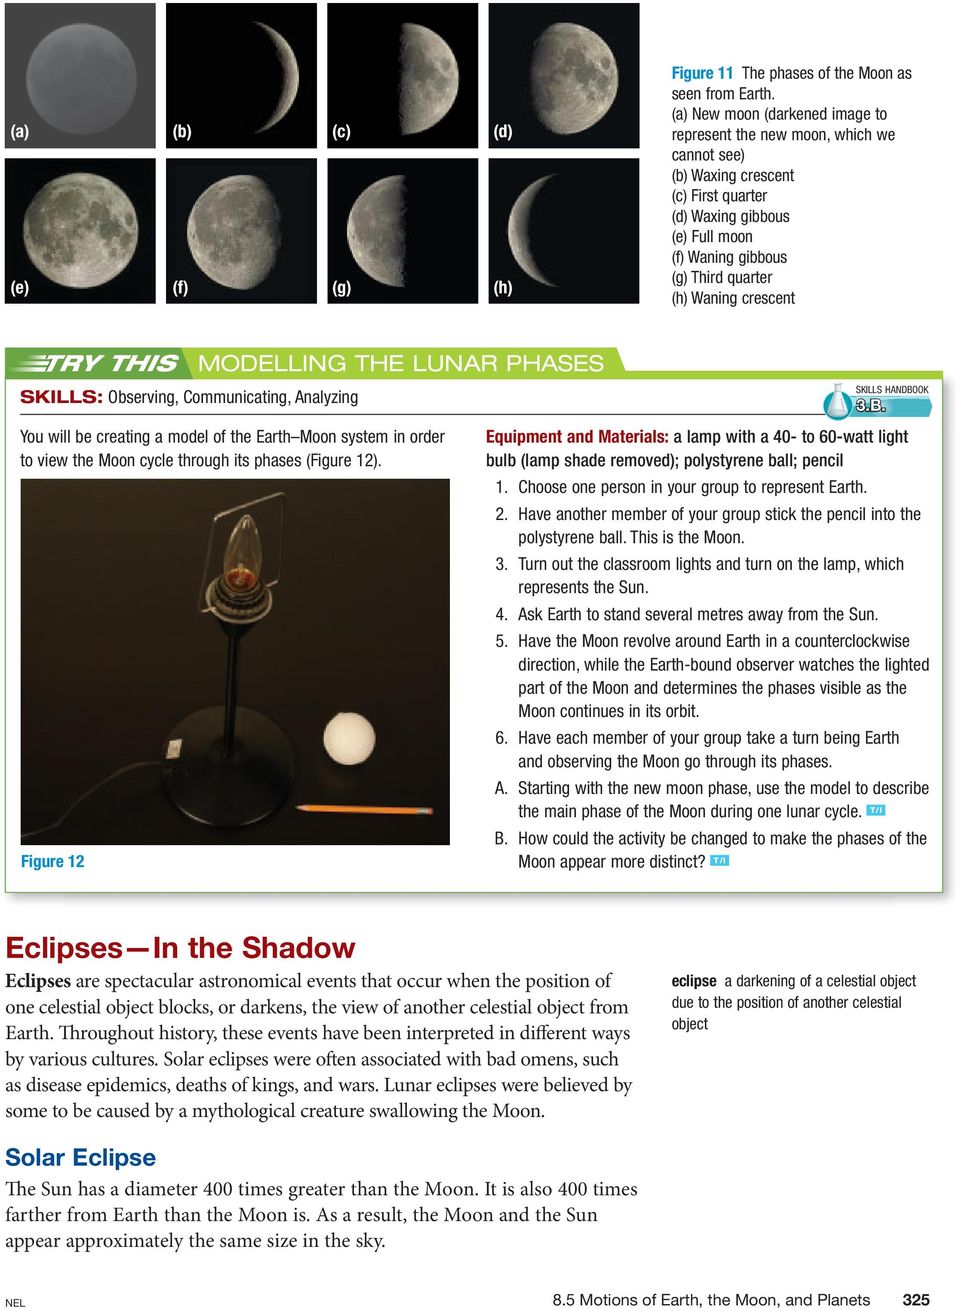 crescent TRY THIS SKILLS: Observing, Communicating, Analyzing MODELLING THE LUNAR PHASES SKILLS HANDBO